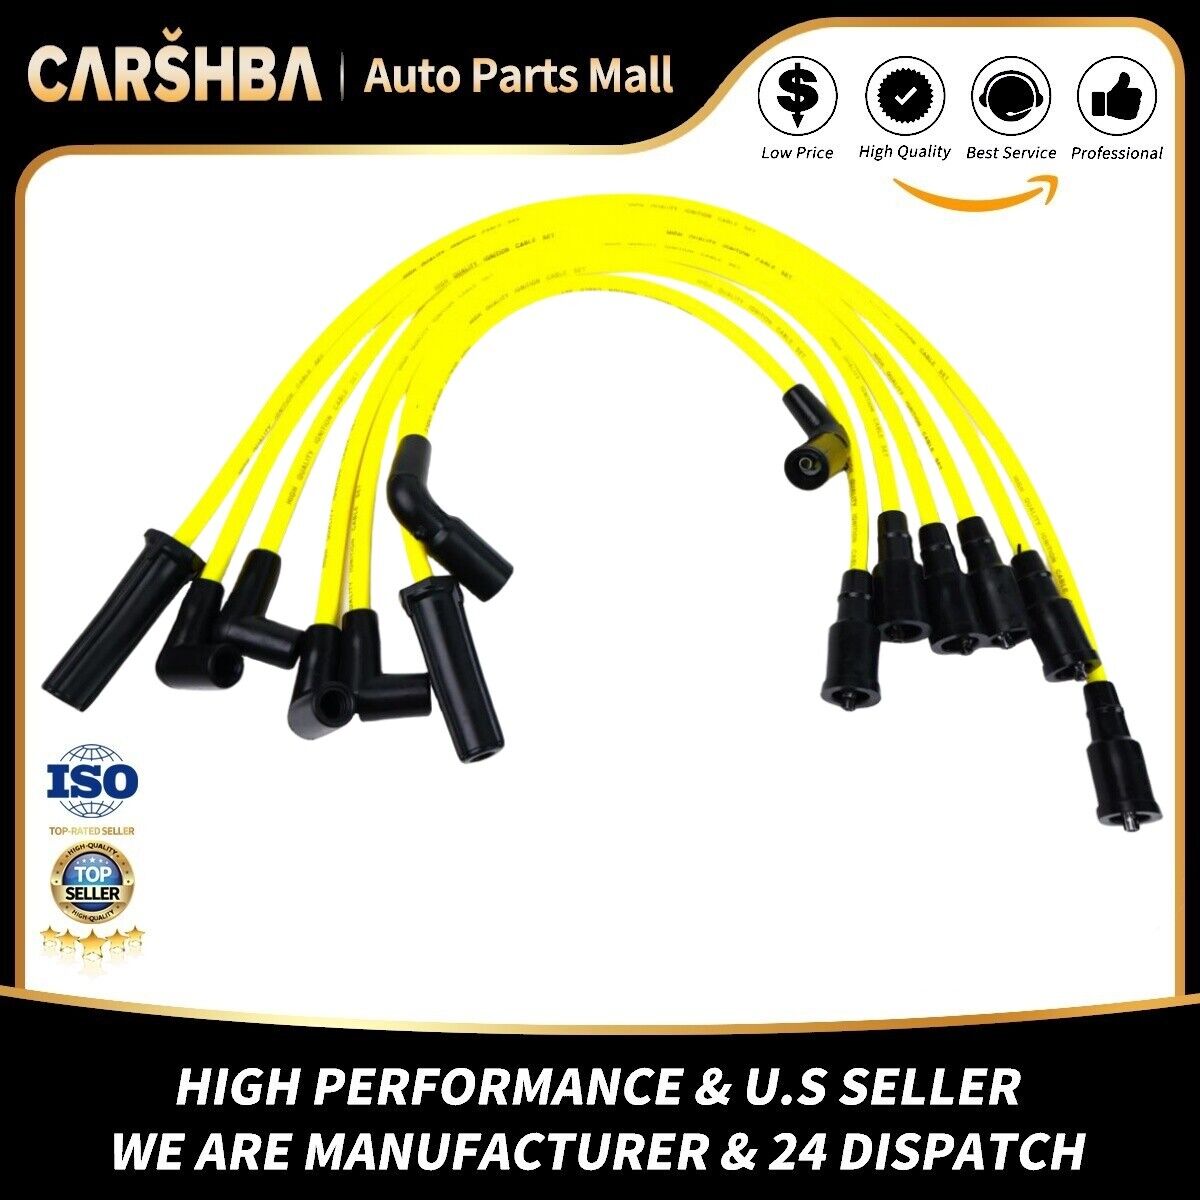 yellow 9-Spark Plug Wires For 1996-2014 Chevy GMC 4.3L Vortec V6 32833 32839